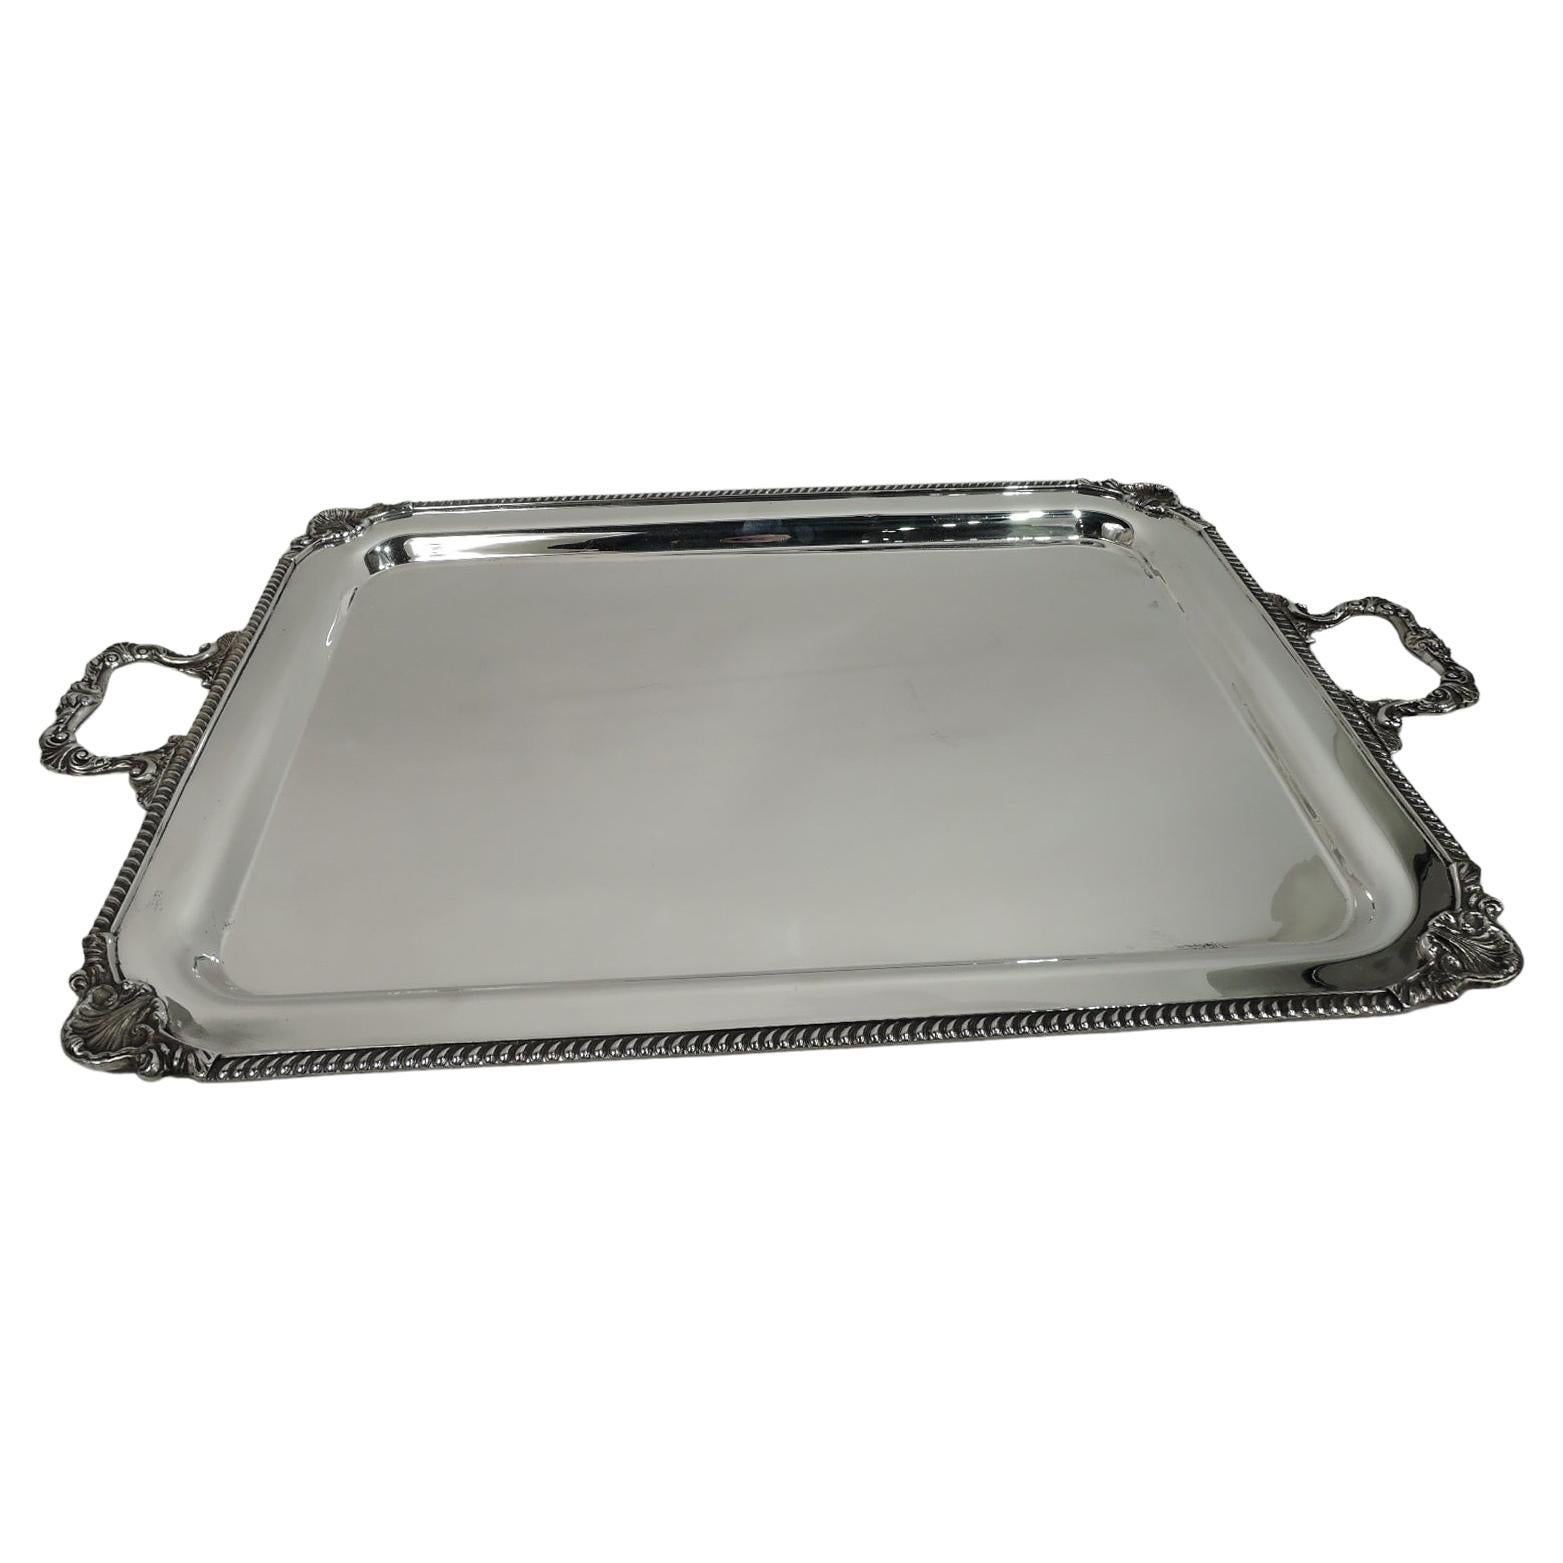 Antique American Georgian-Style Sterling Silver Tea Tray